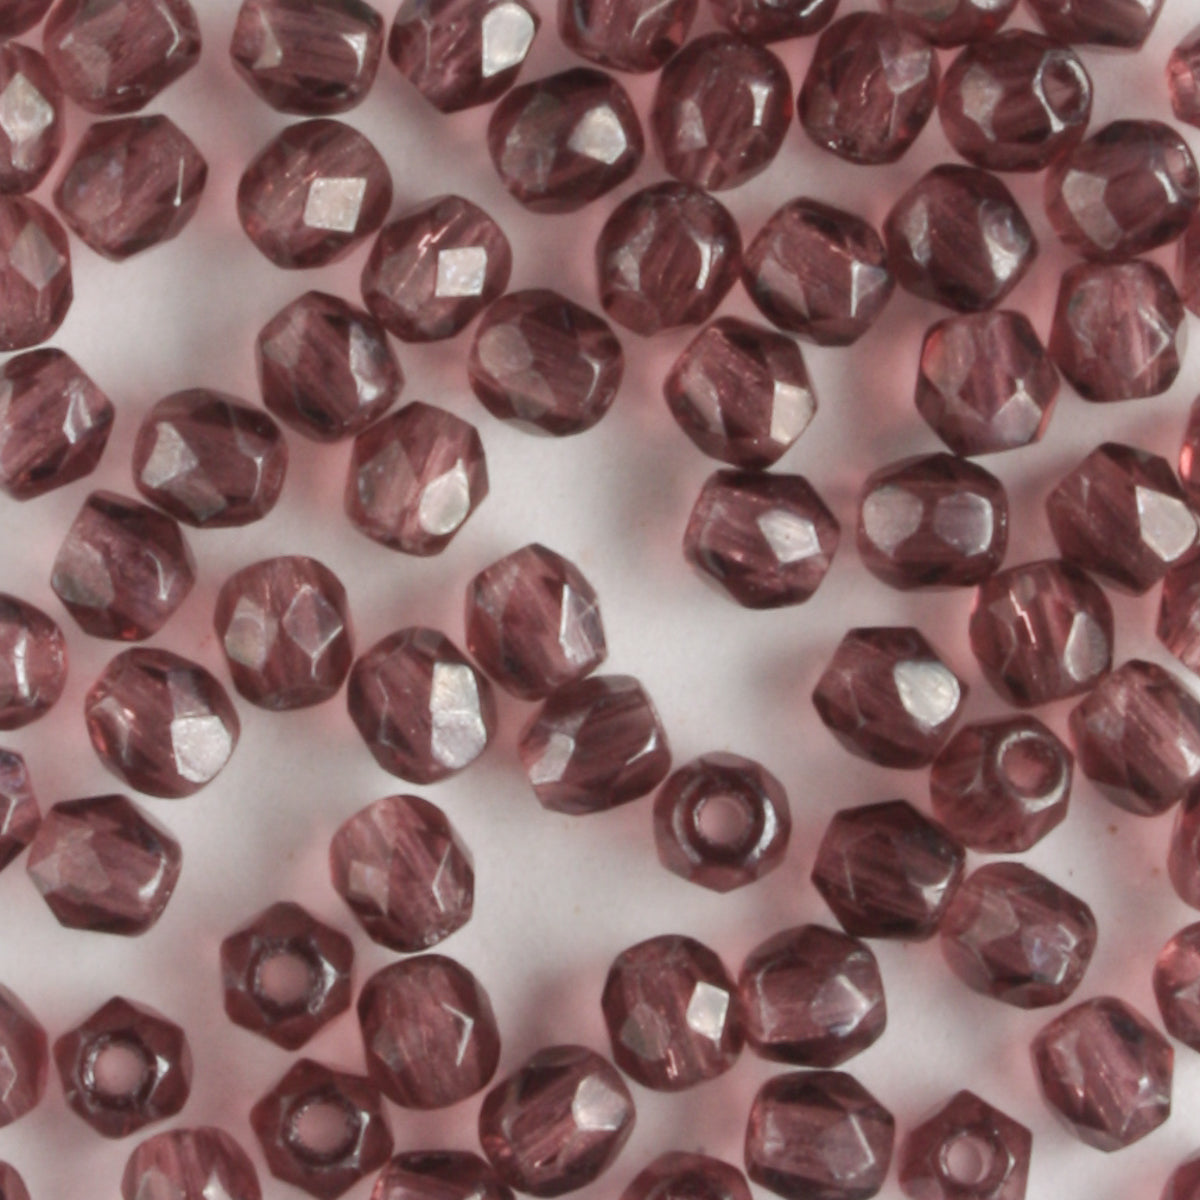 3mm Round Fire Polish Amethyst Luster - 100 beads